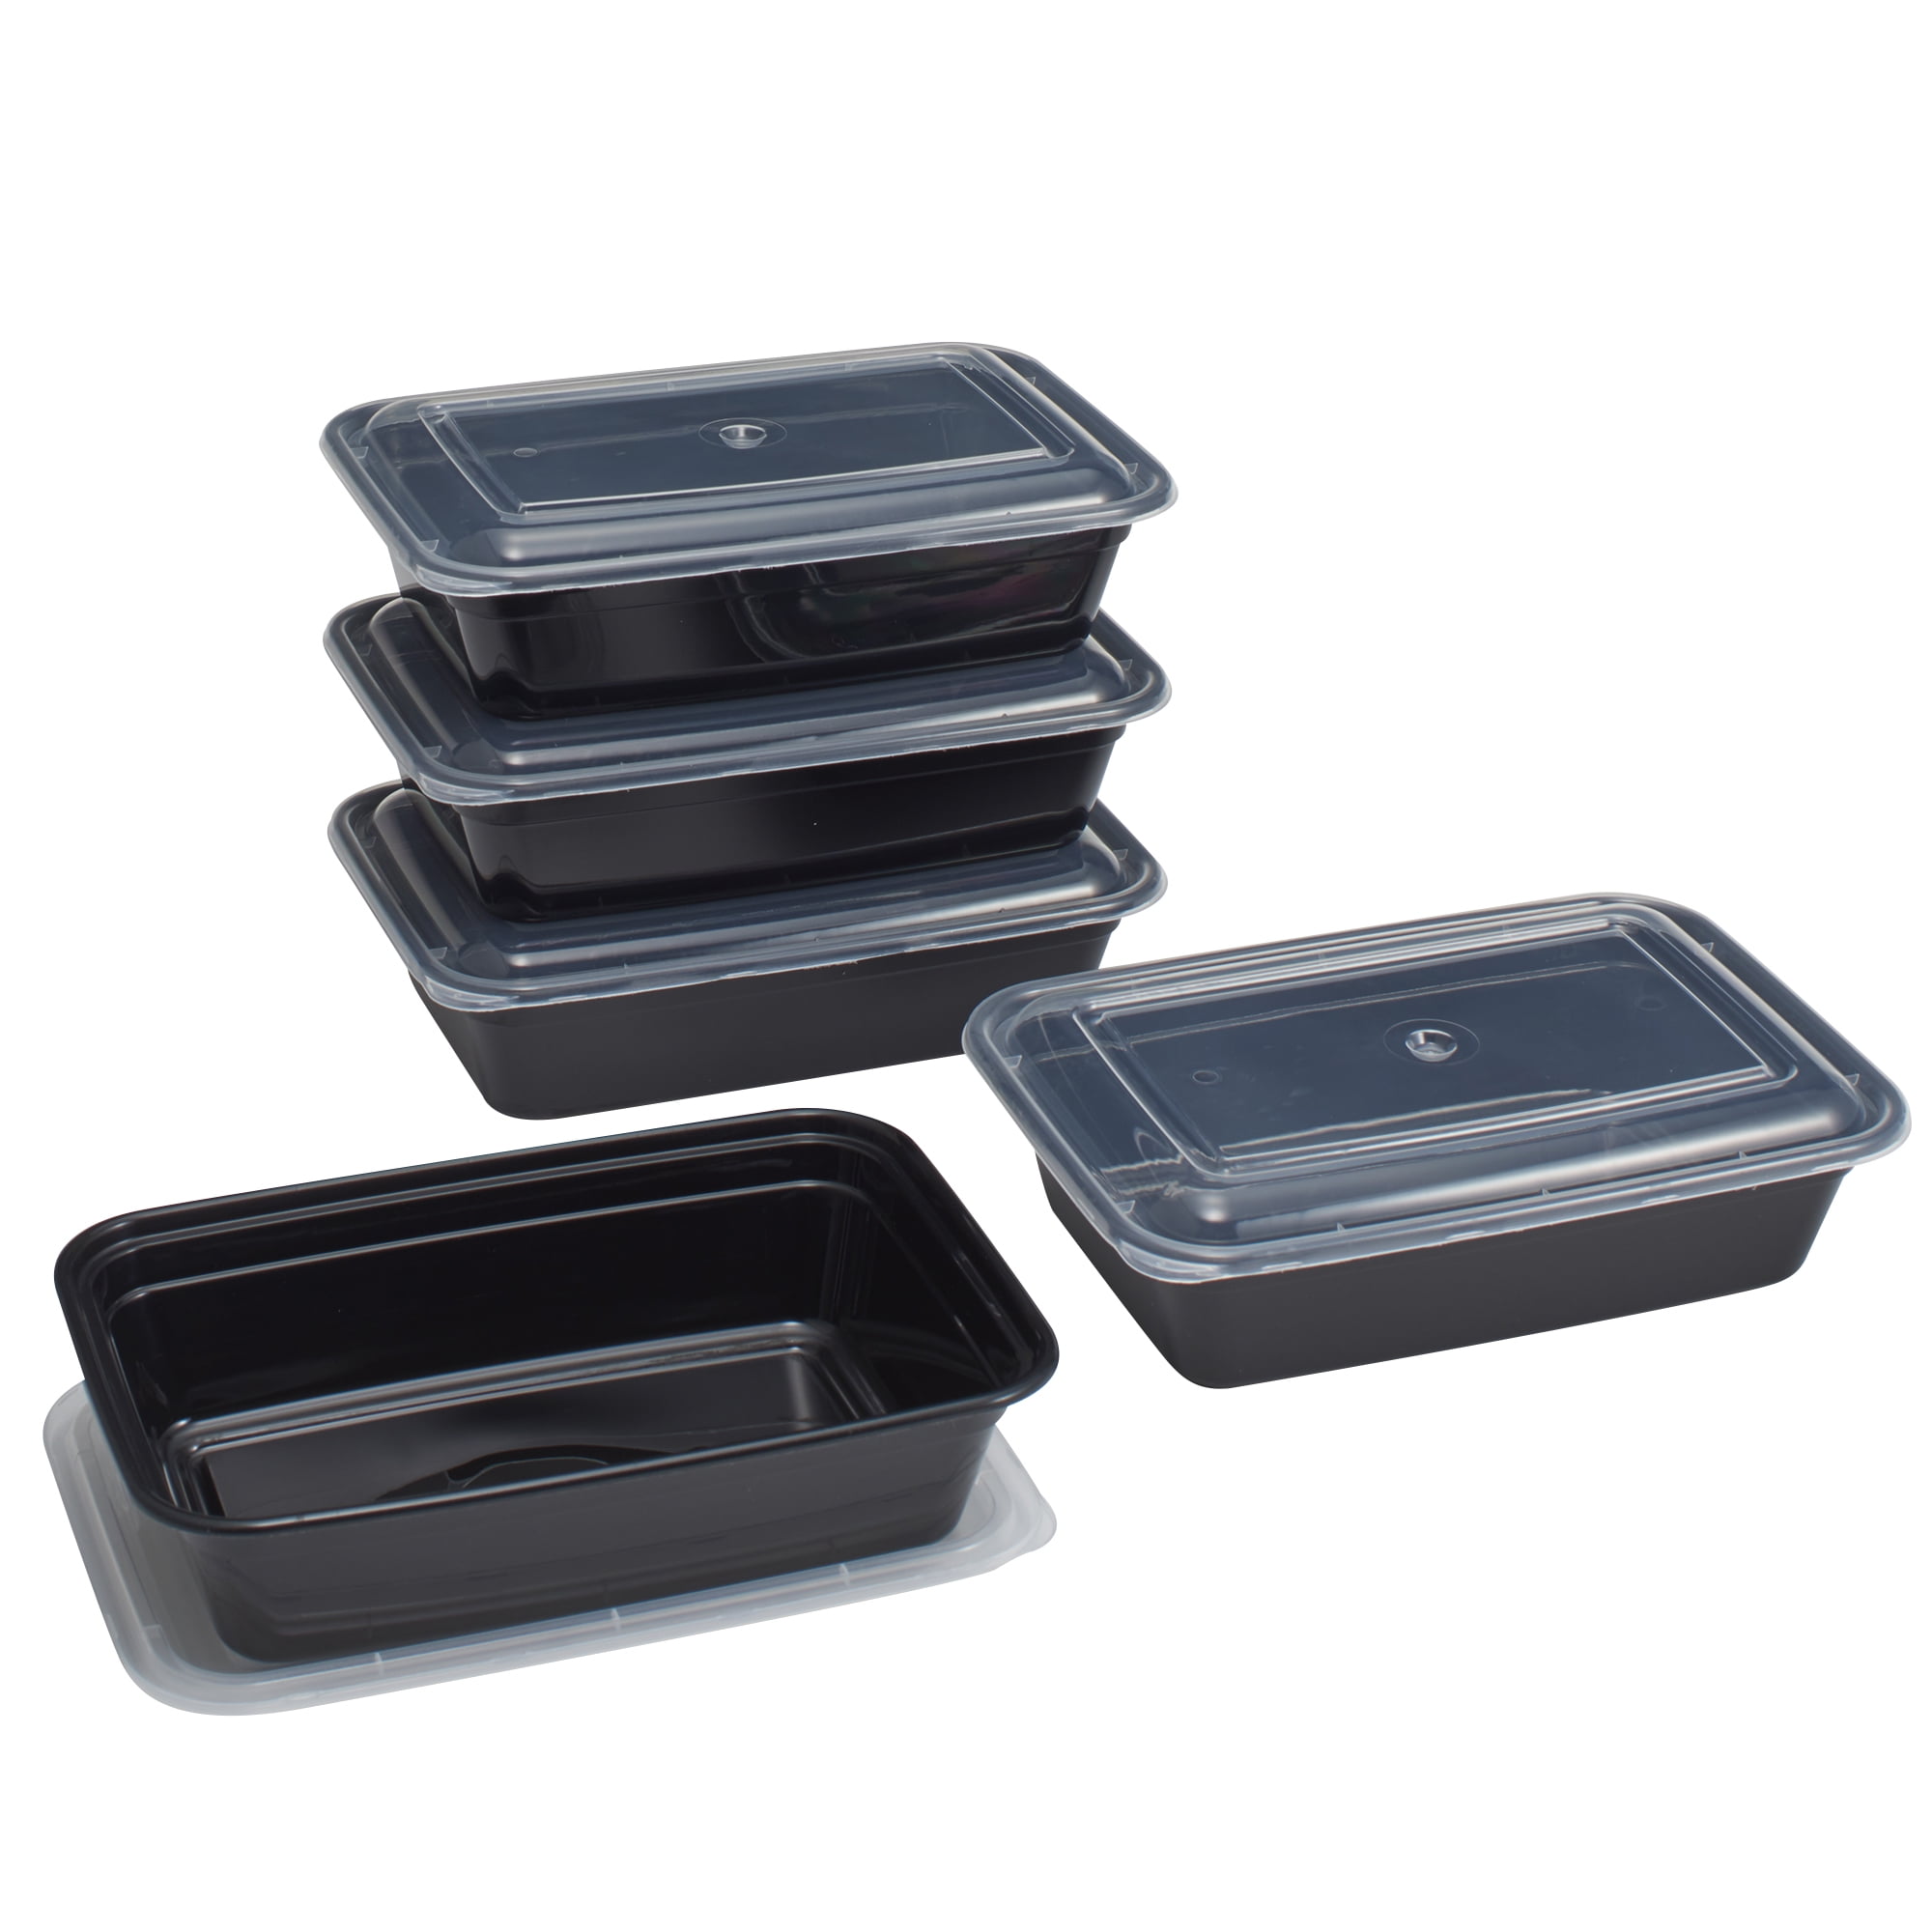 Mainstays 10 Piece 4.2 Cup Rectangle Meal Prep Food Storage Container